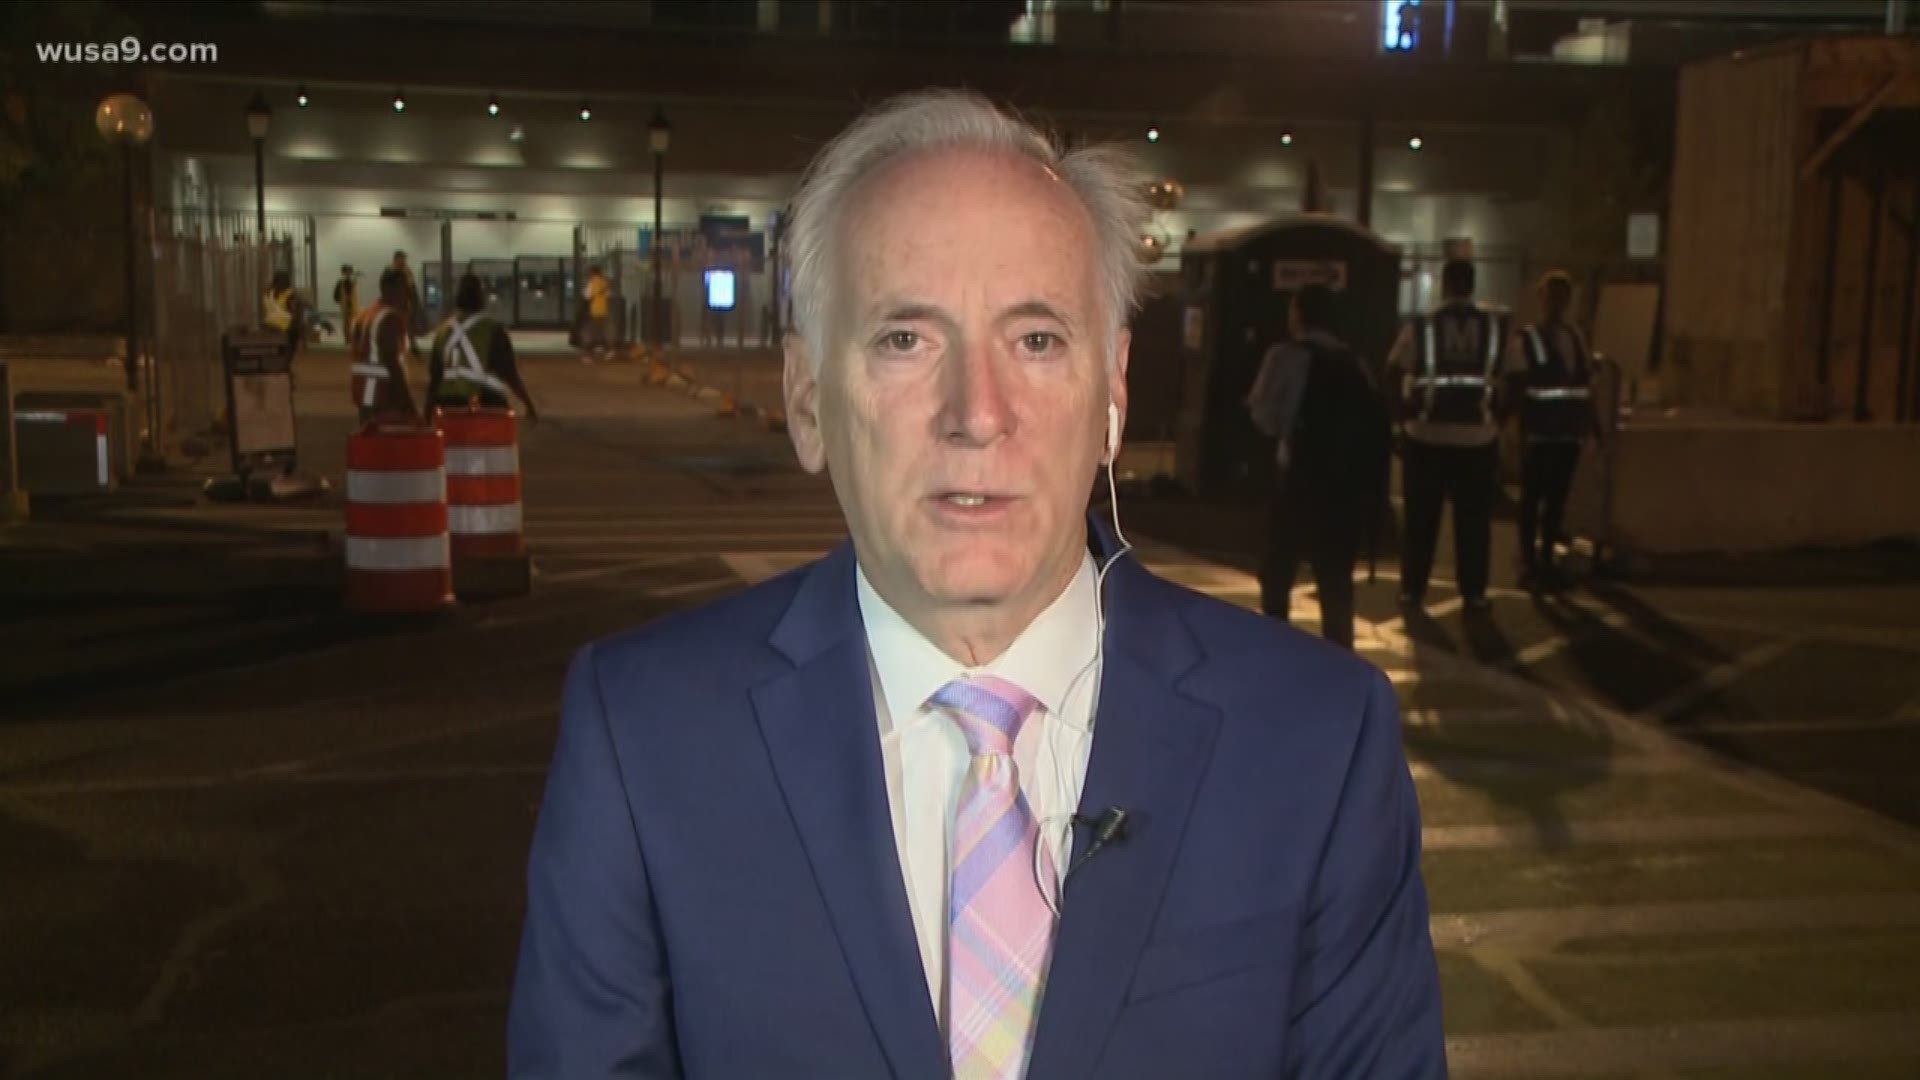 Six Metro station on the Blue and Yellow lines south of DCA reopen Monday. Metro General Manager Paul J. Wiedefeld says it will feel like a brand new station and it's much safer.